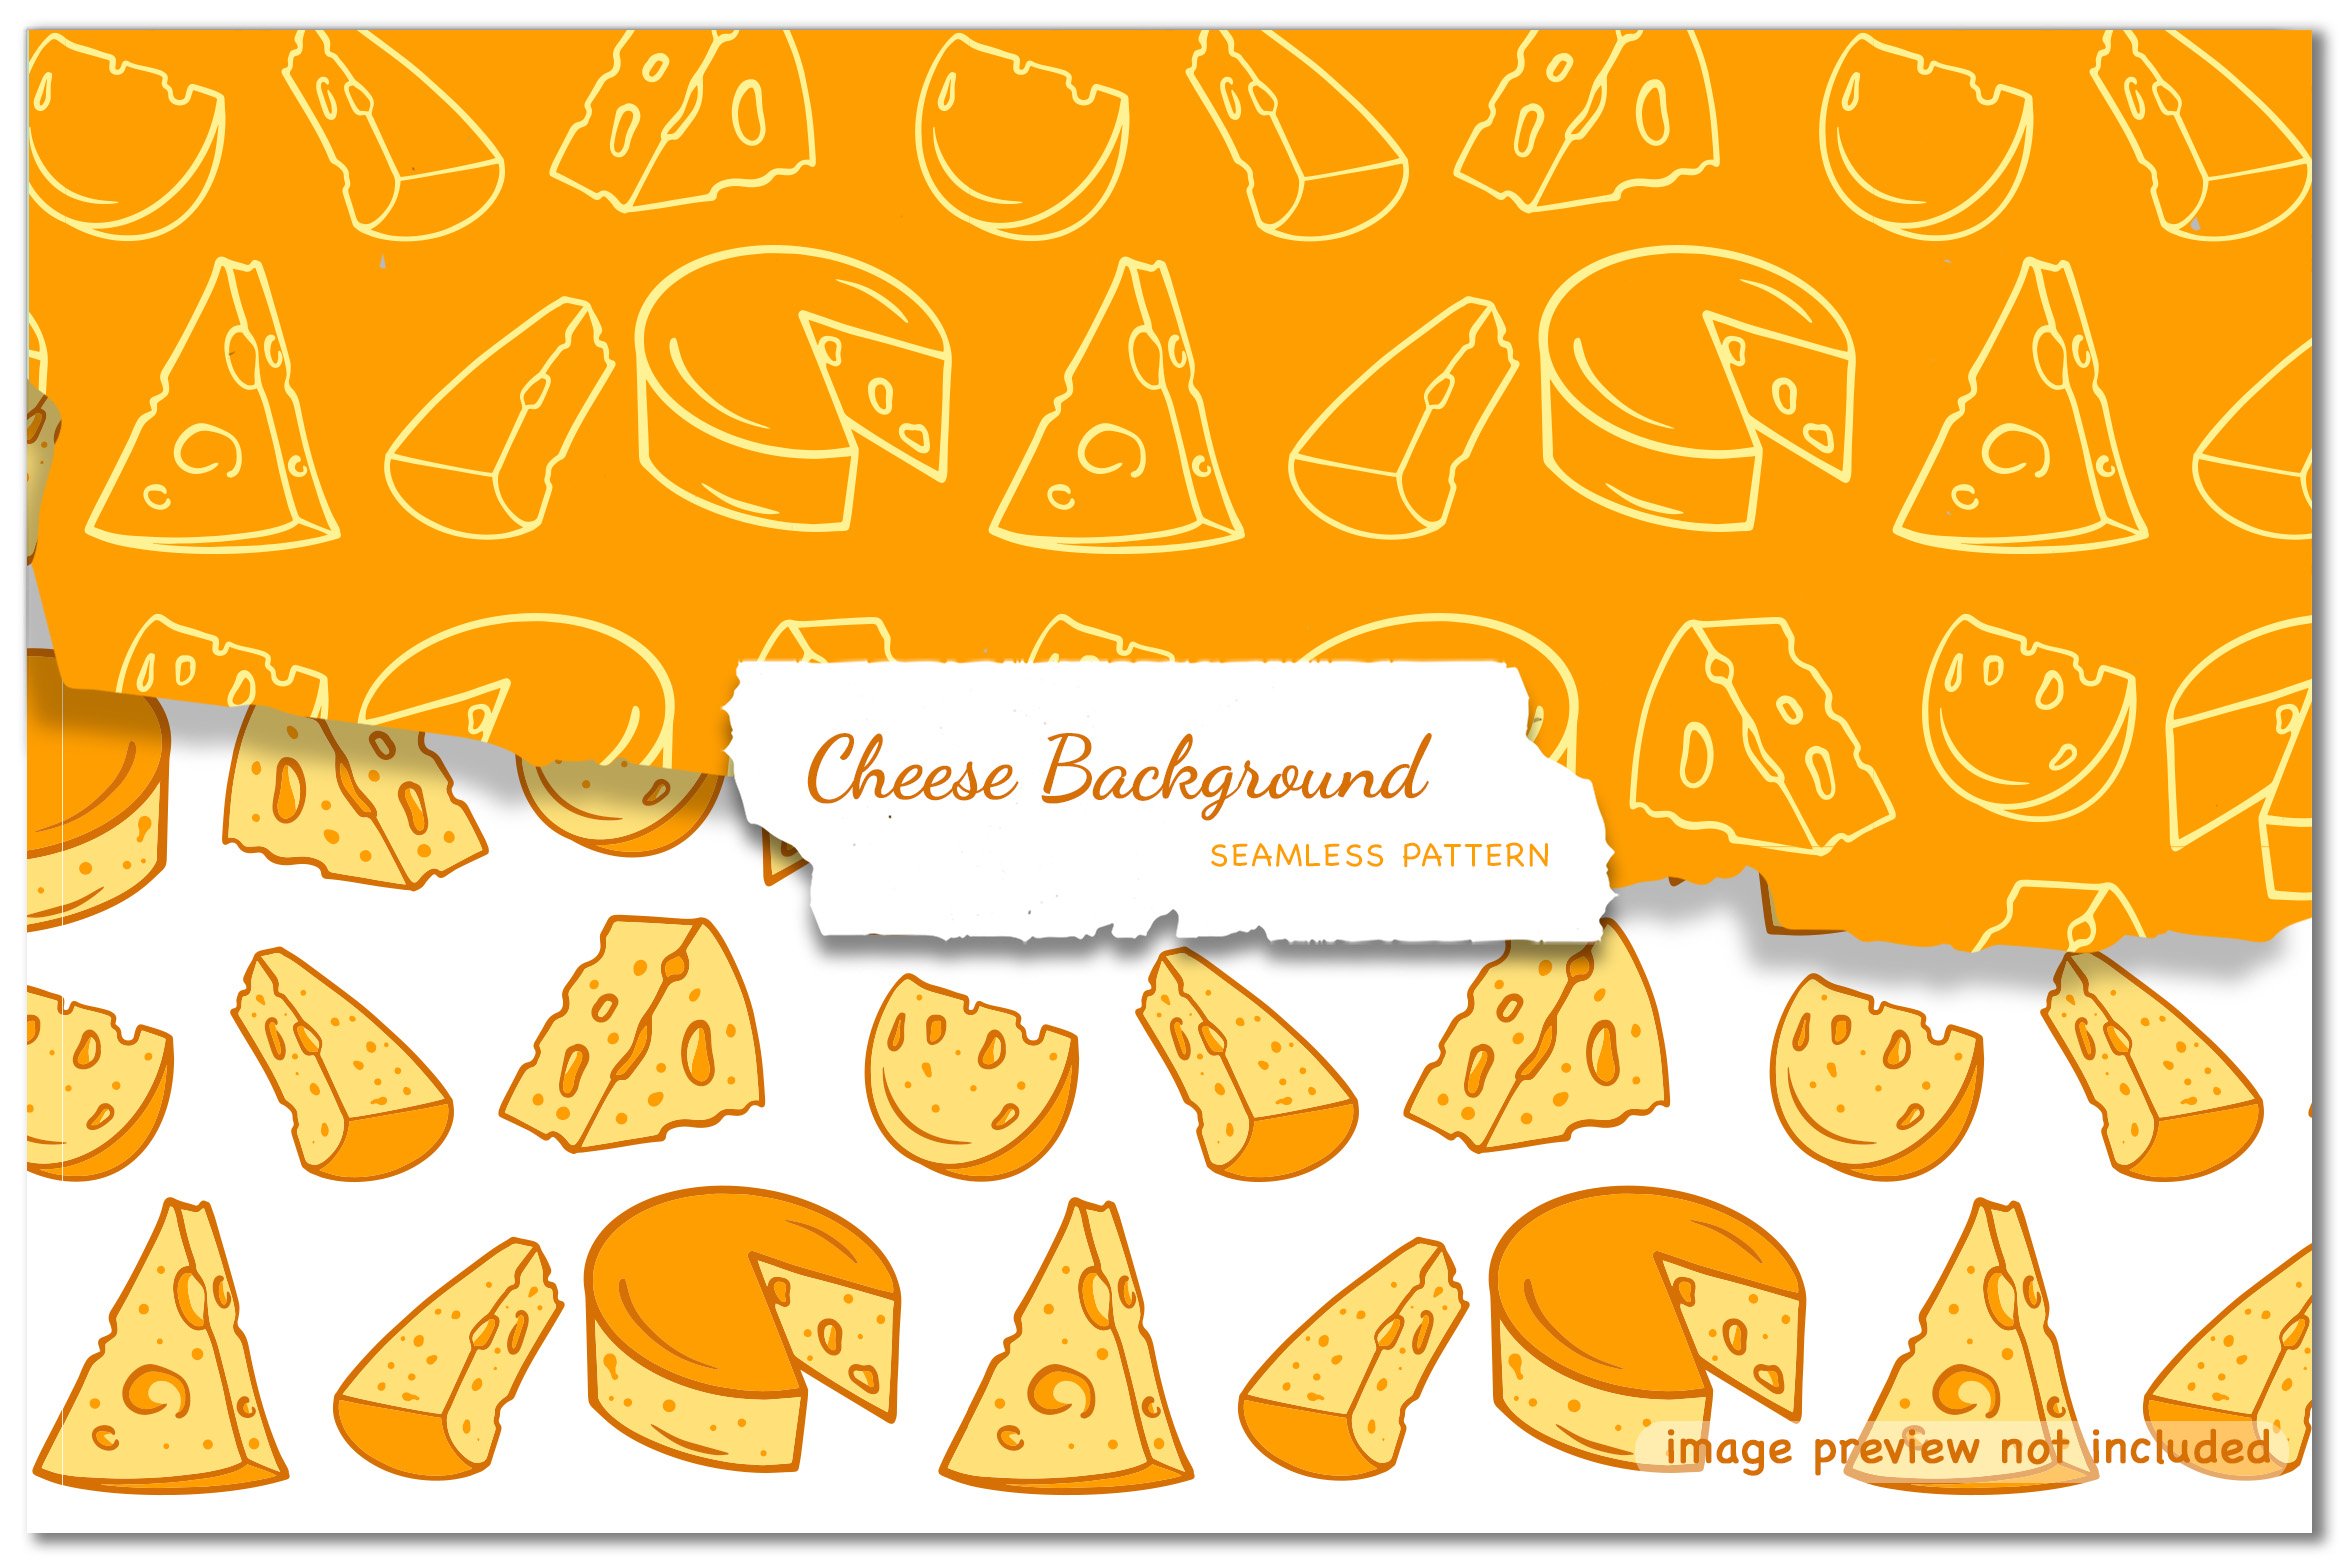 Beautiful seamless background with images of swiss cheese.